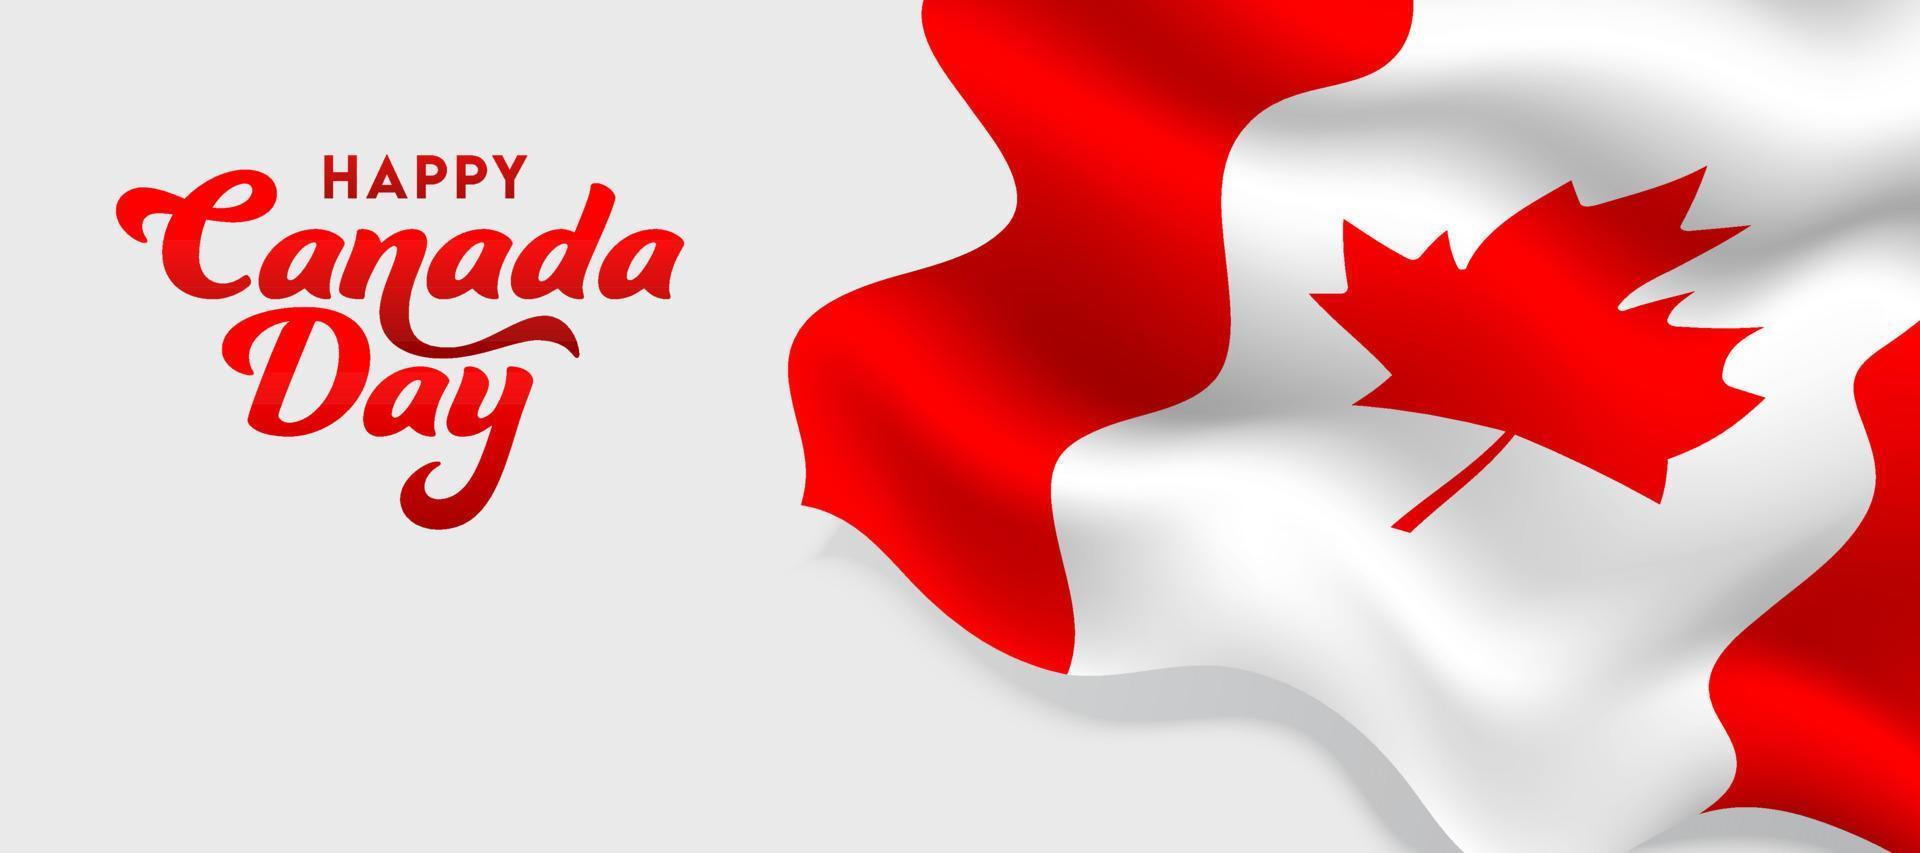 Happy Canada Day Font with Glossy Canadian Wavy Flag on White Background. vector